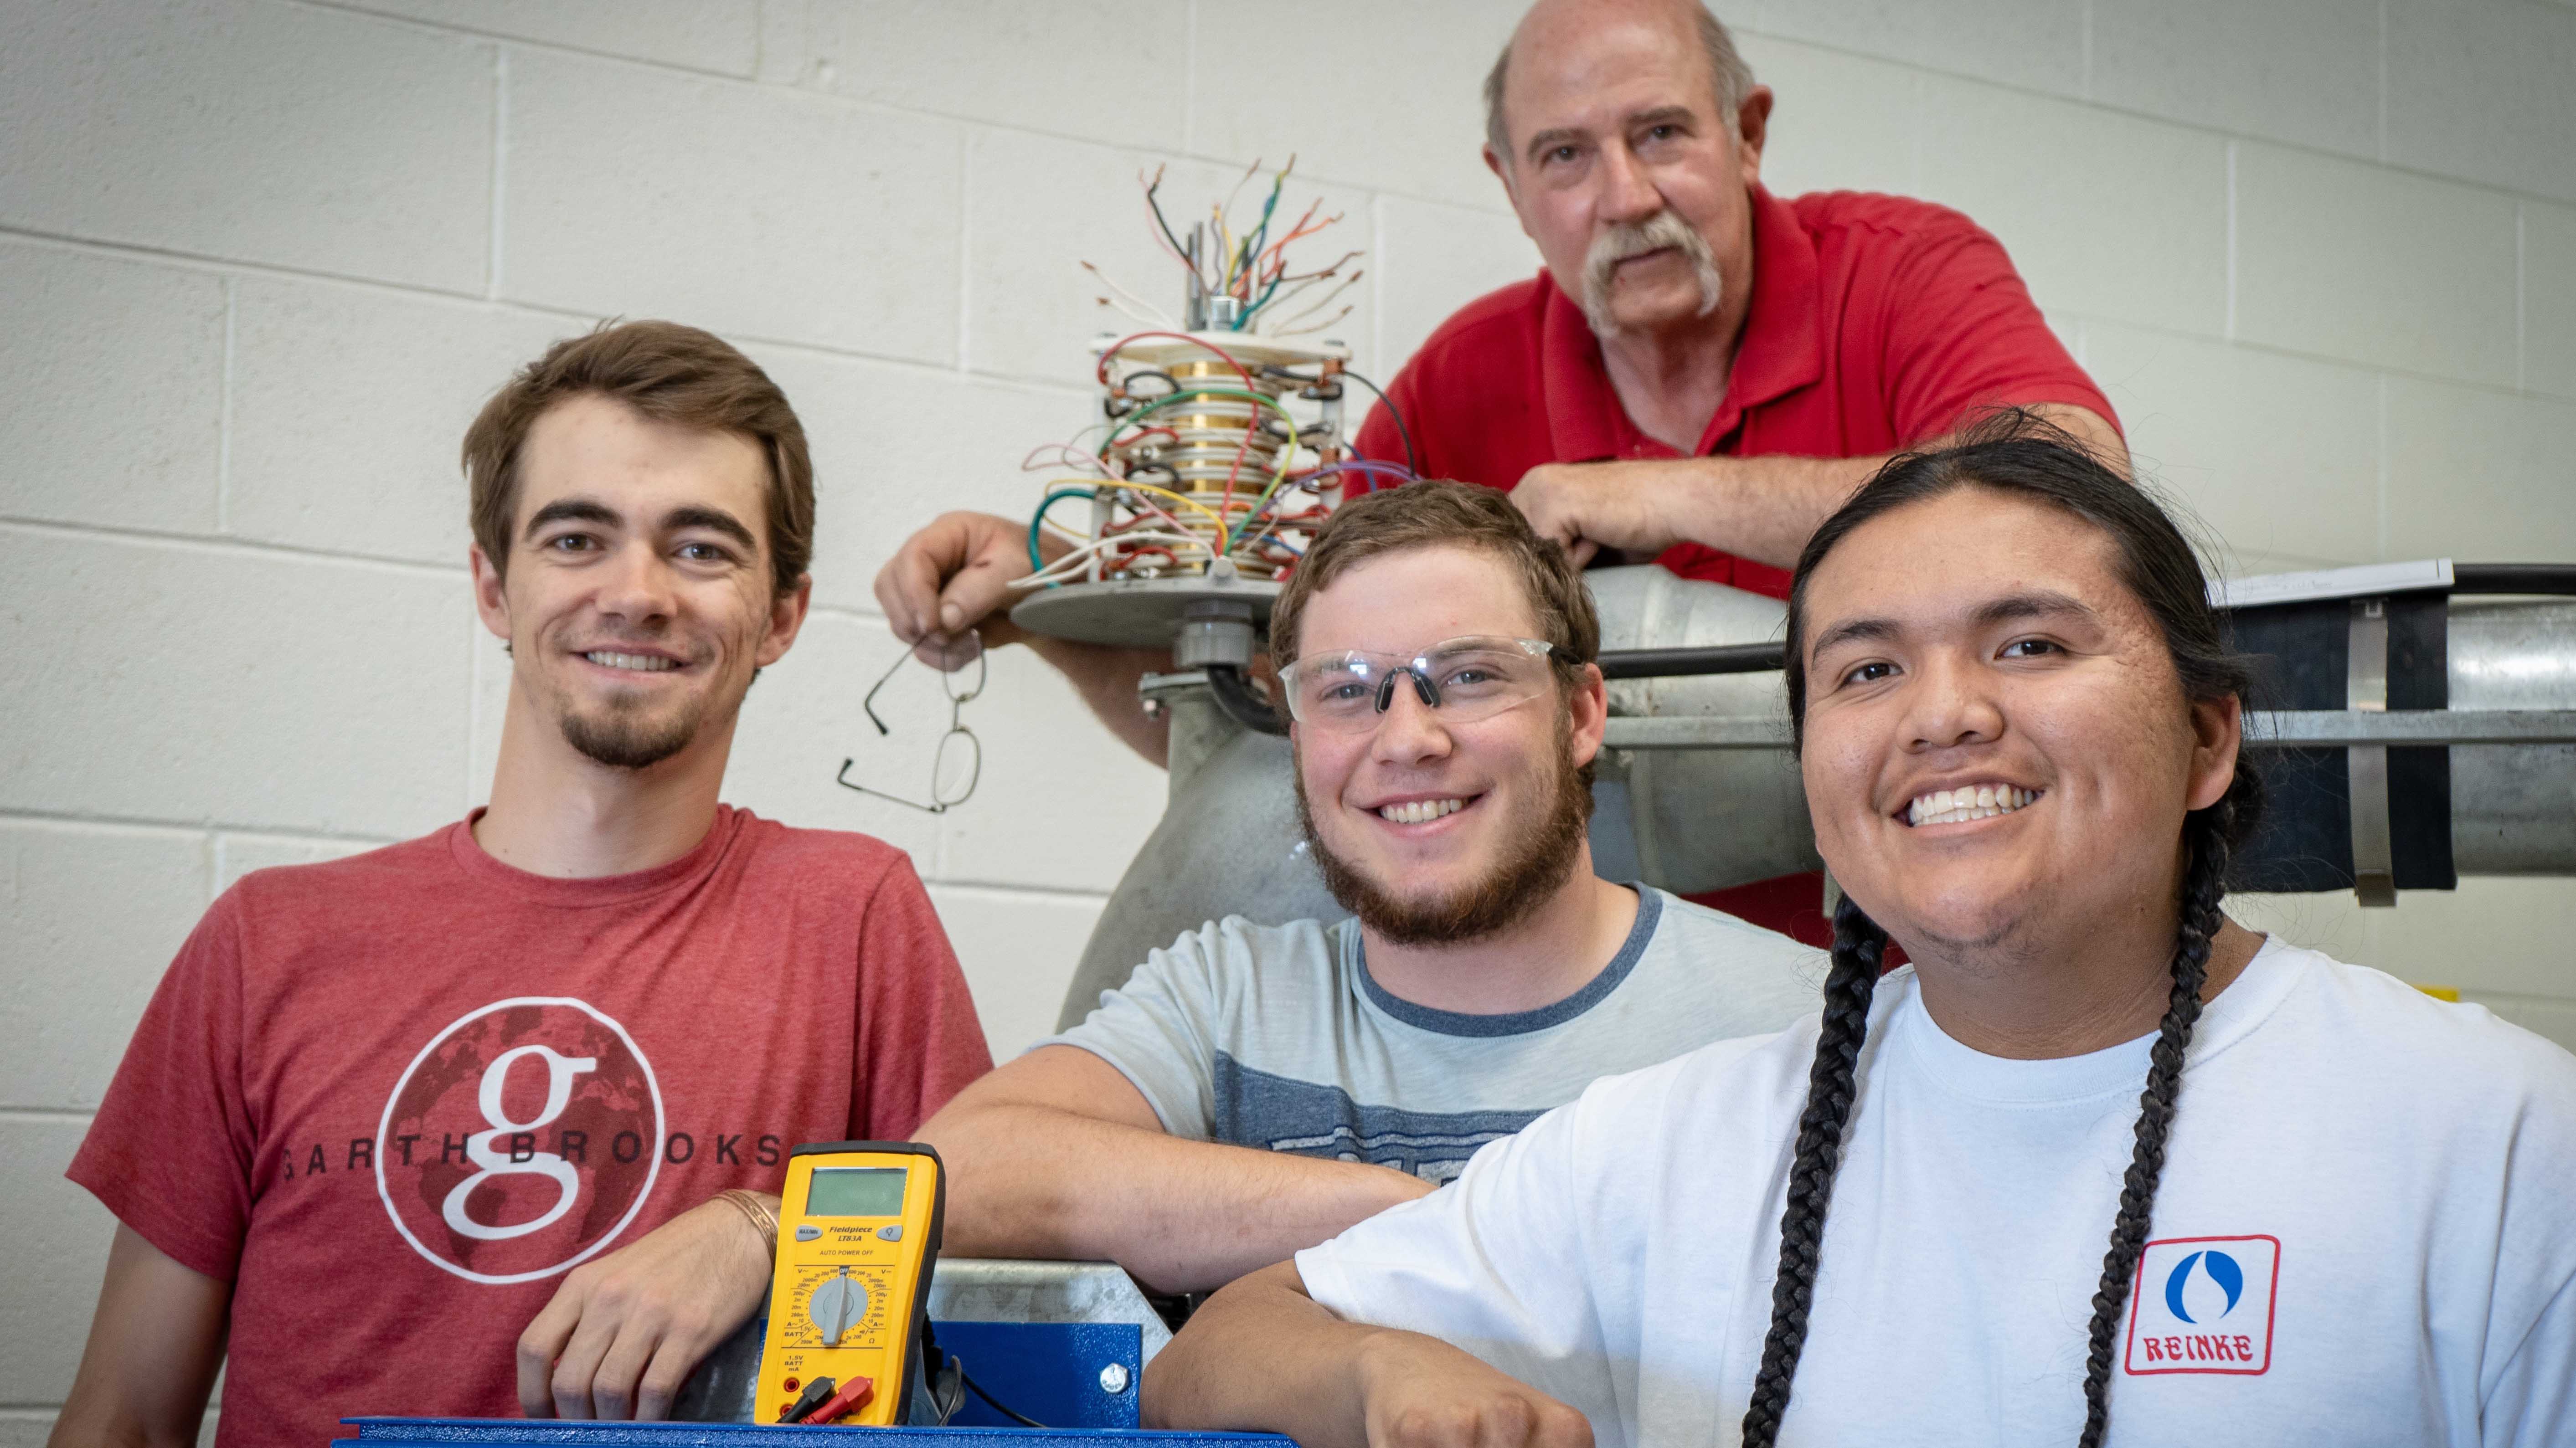 Irrigation technician students studying at the Nebraska College of Technical Agriculture in April, 2019, with their instructor Dan Stehlik, are from left, Clancey Smith of Nebraska, Troyal Burris of Kansas and Kolton Begay of Colorado. NCTA was recognized in June with two awards for Outstanding Postsecondary Programs in Nebraska organizations. (Cy Cannon / NCTA photo)